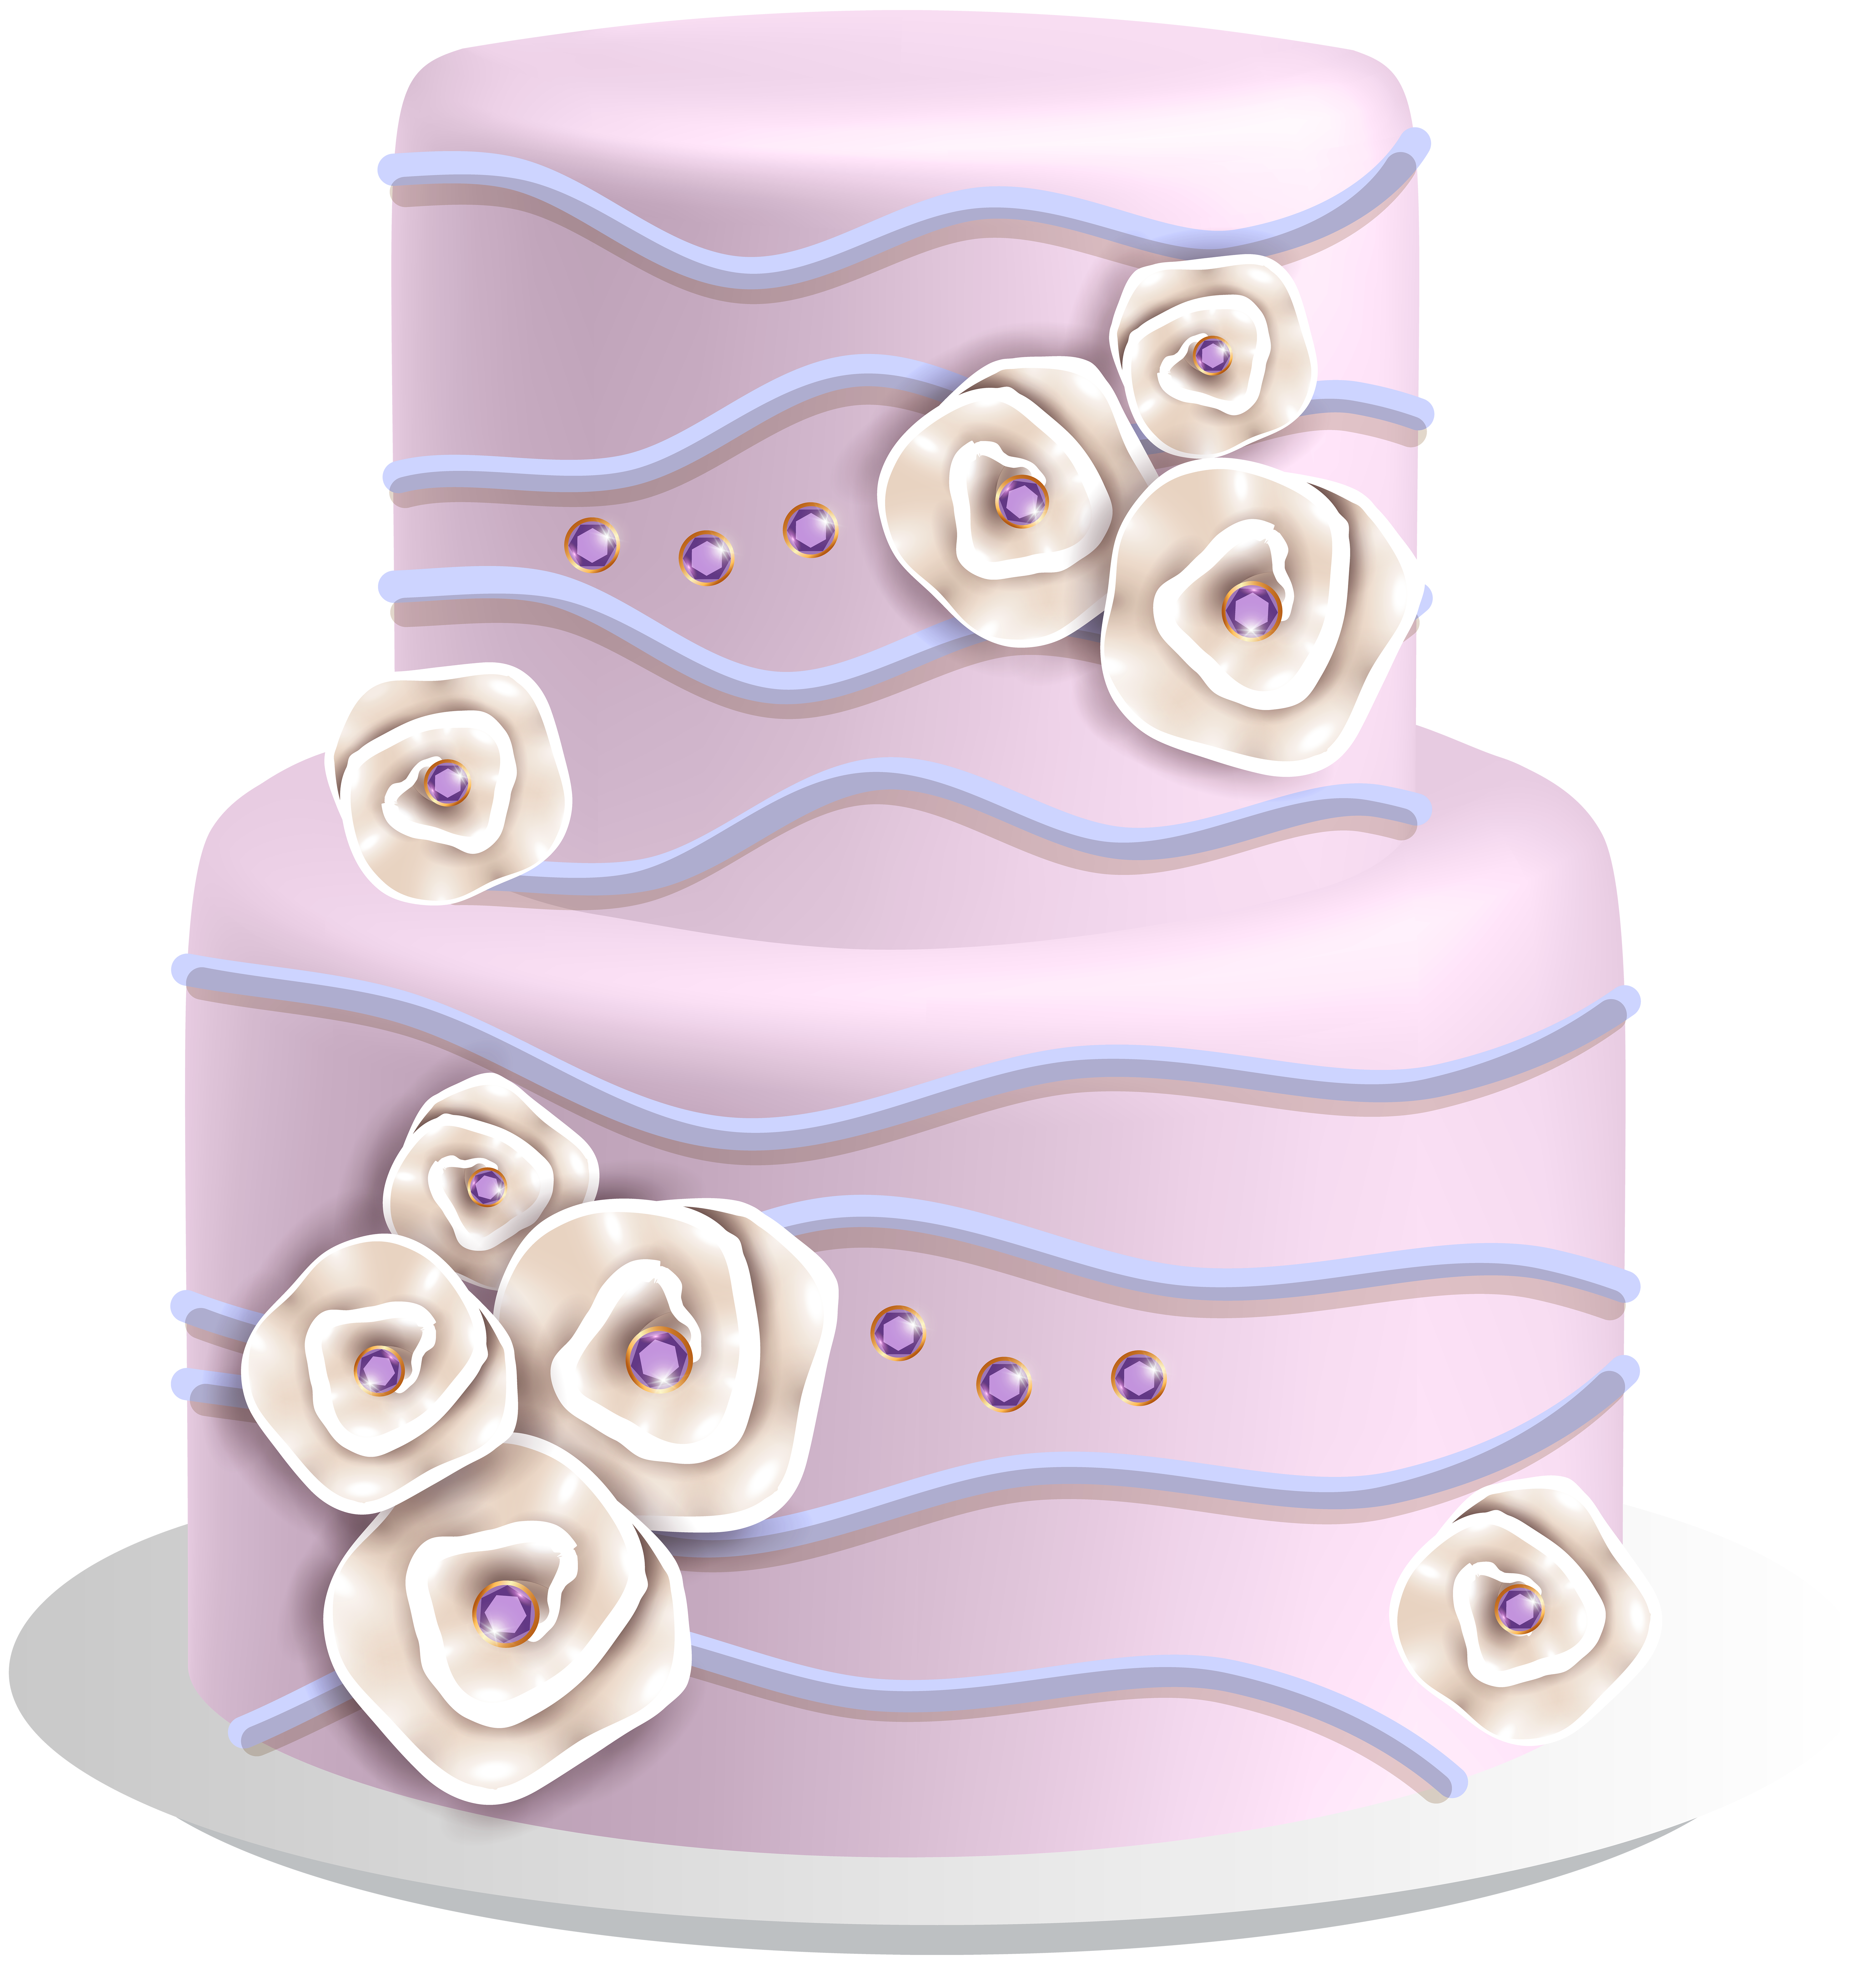 Cake PNG, Vector, PSD, and Clipart With Transparent Background for Free  Download | Pngtree